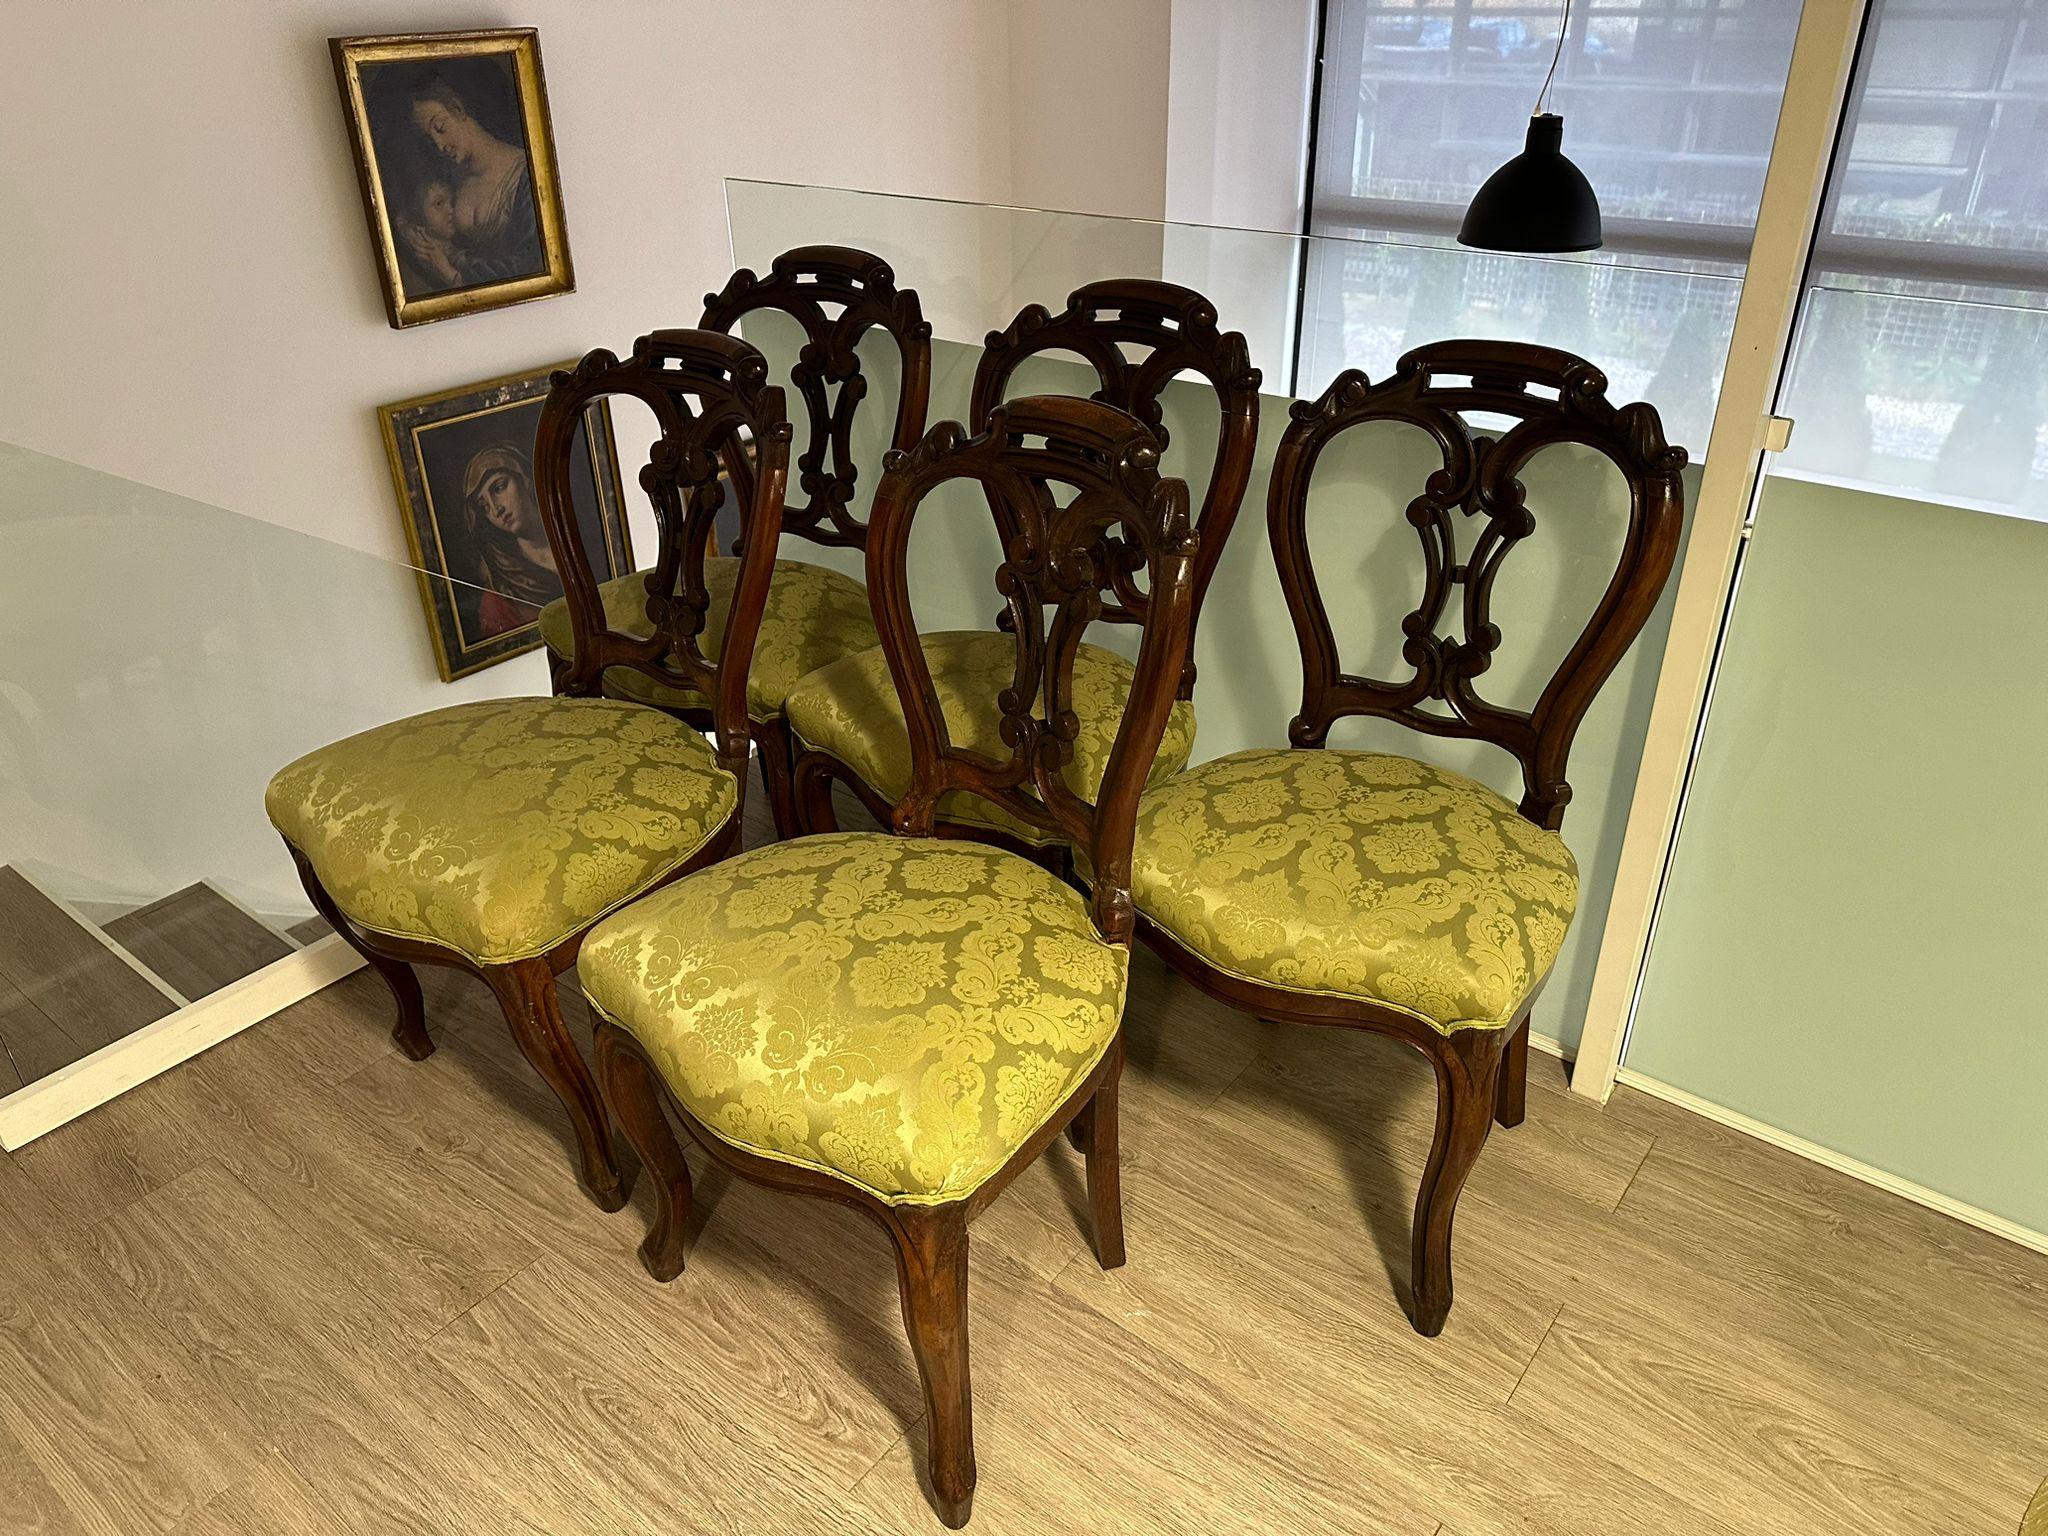 Hand-Crafted Set of Five Portuguese Chairs Romantic 19th Century